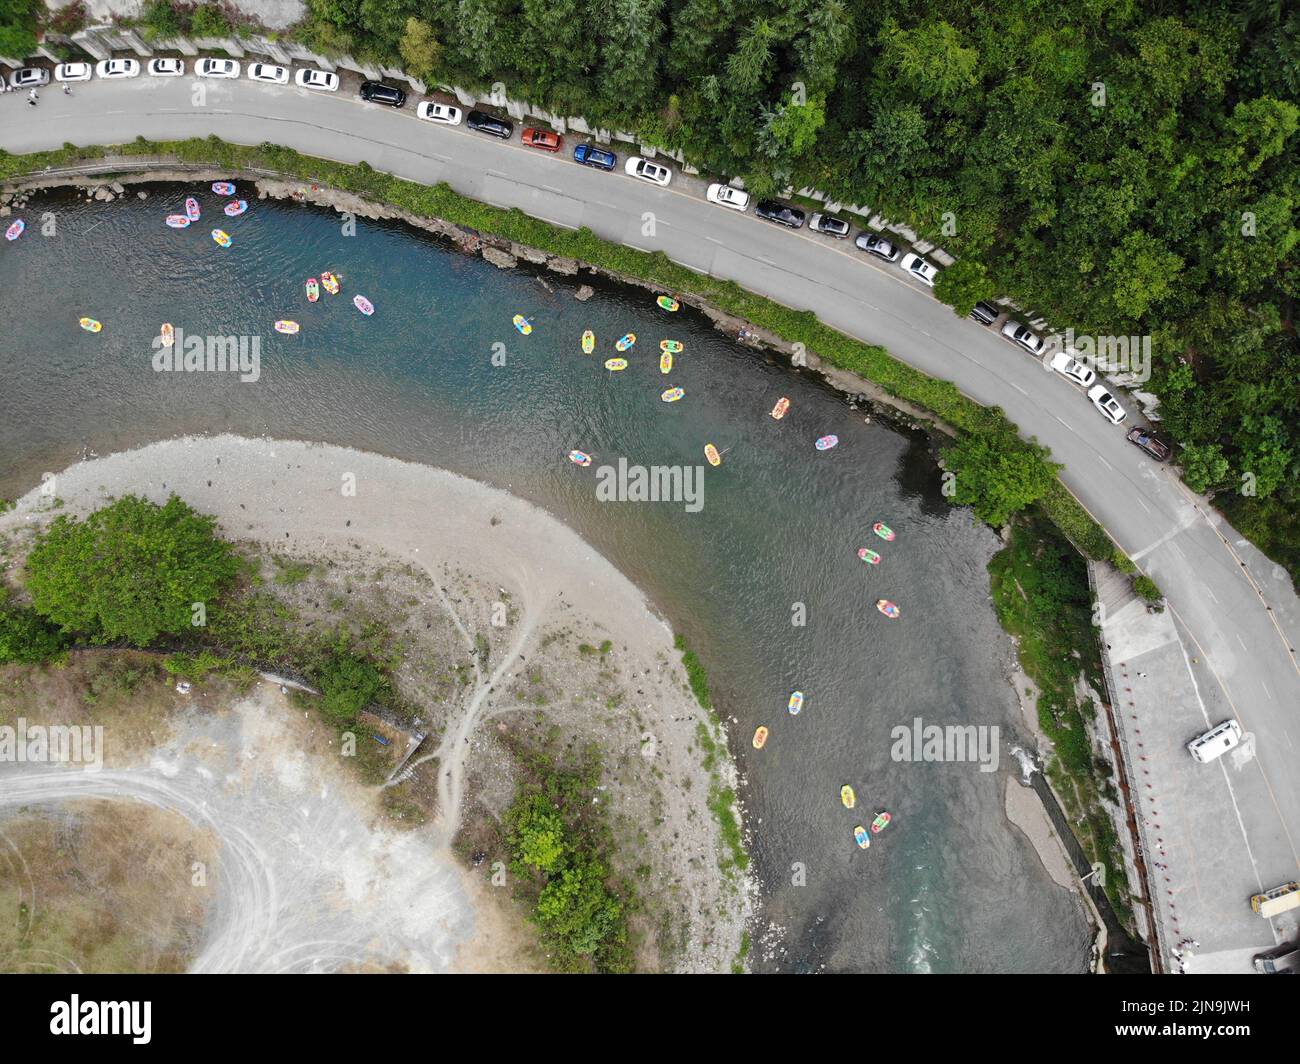 Kaiyang. 10th Aug, 2022. Aerial photo taken on Aug. 10, 2022 shows tourists floating down a river on rafts at the Nanjiang grand canyon scenic area in Kaiyang County, southwest China's Guizhou Province. The scenic area has been a hot spot for tourists to escape the summer heat. Credit: Xiang Dingjie/Xinhua/Alamy Live News Stock Photo